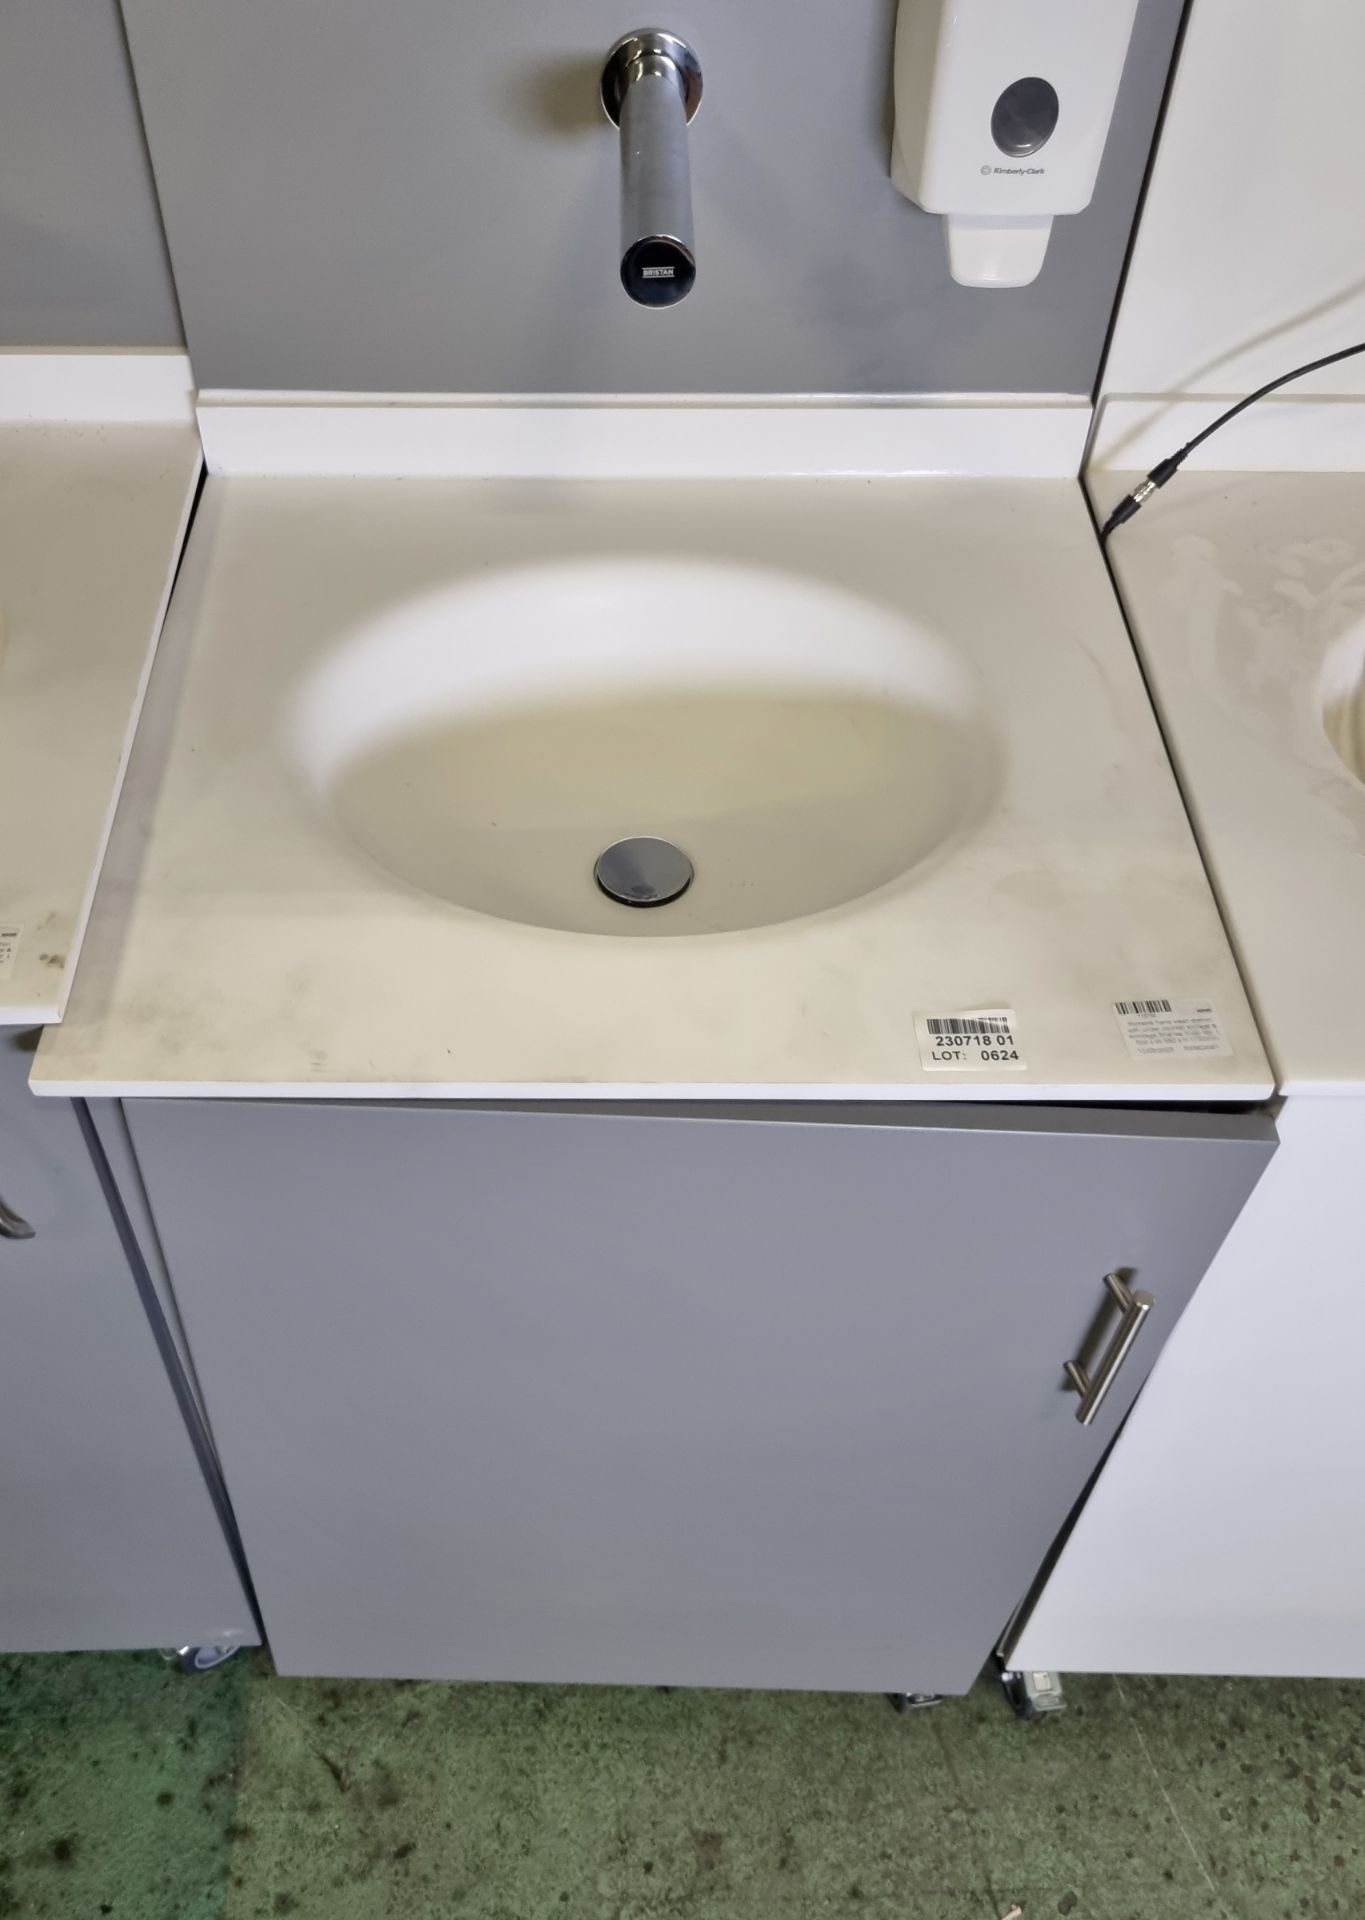 Portable hand wash station with under counter storage & Armitage Shanks mixer tap L 600 x W 680 - Image 2 of 4